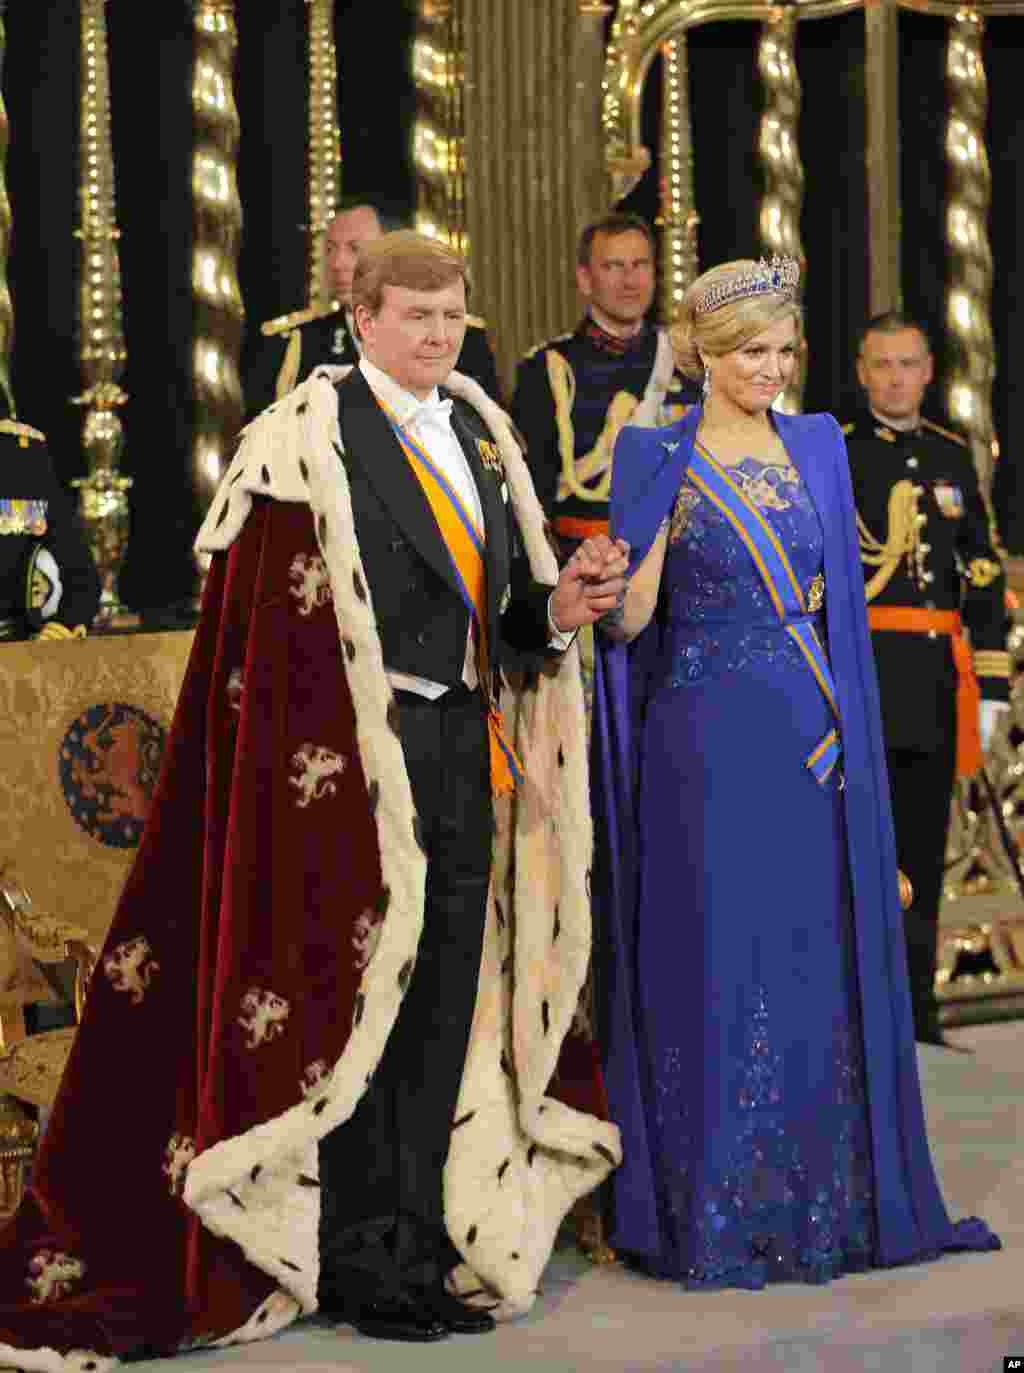 Dutch King Willem-Alexander and his wife Queen Maxima stand inside the Nieuwe Kerk or New Church in Amsterdam, The Netherlands, for his coronation, April 30, 2013. 